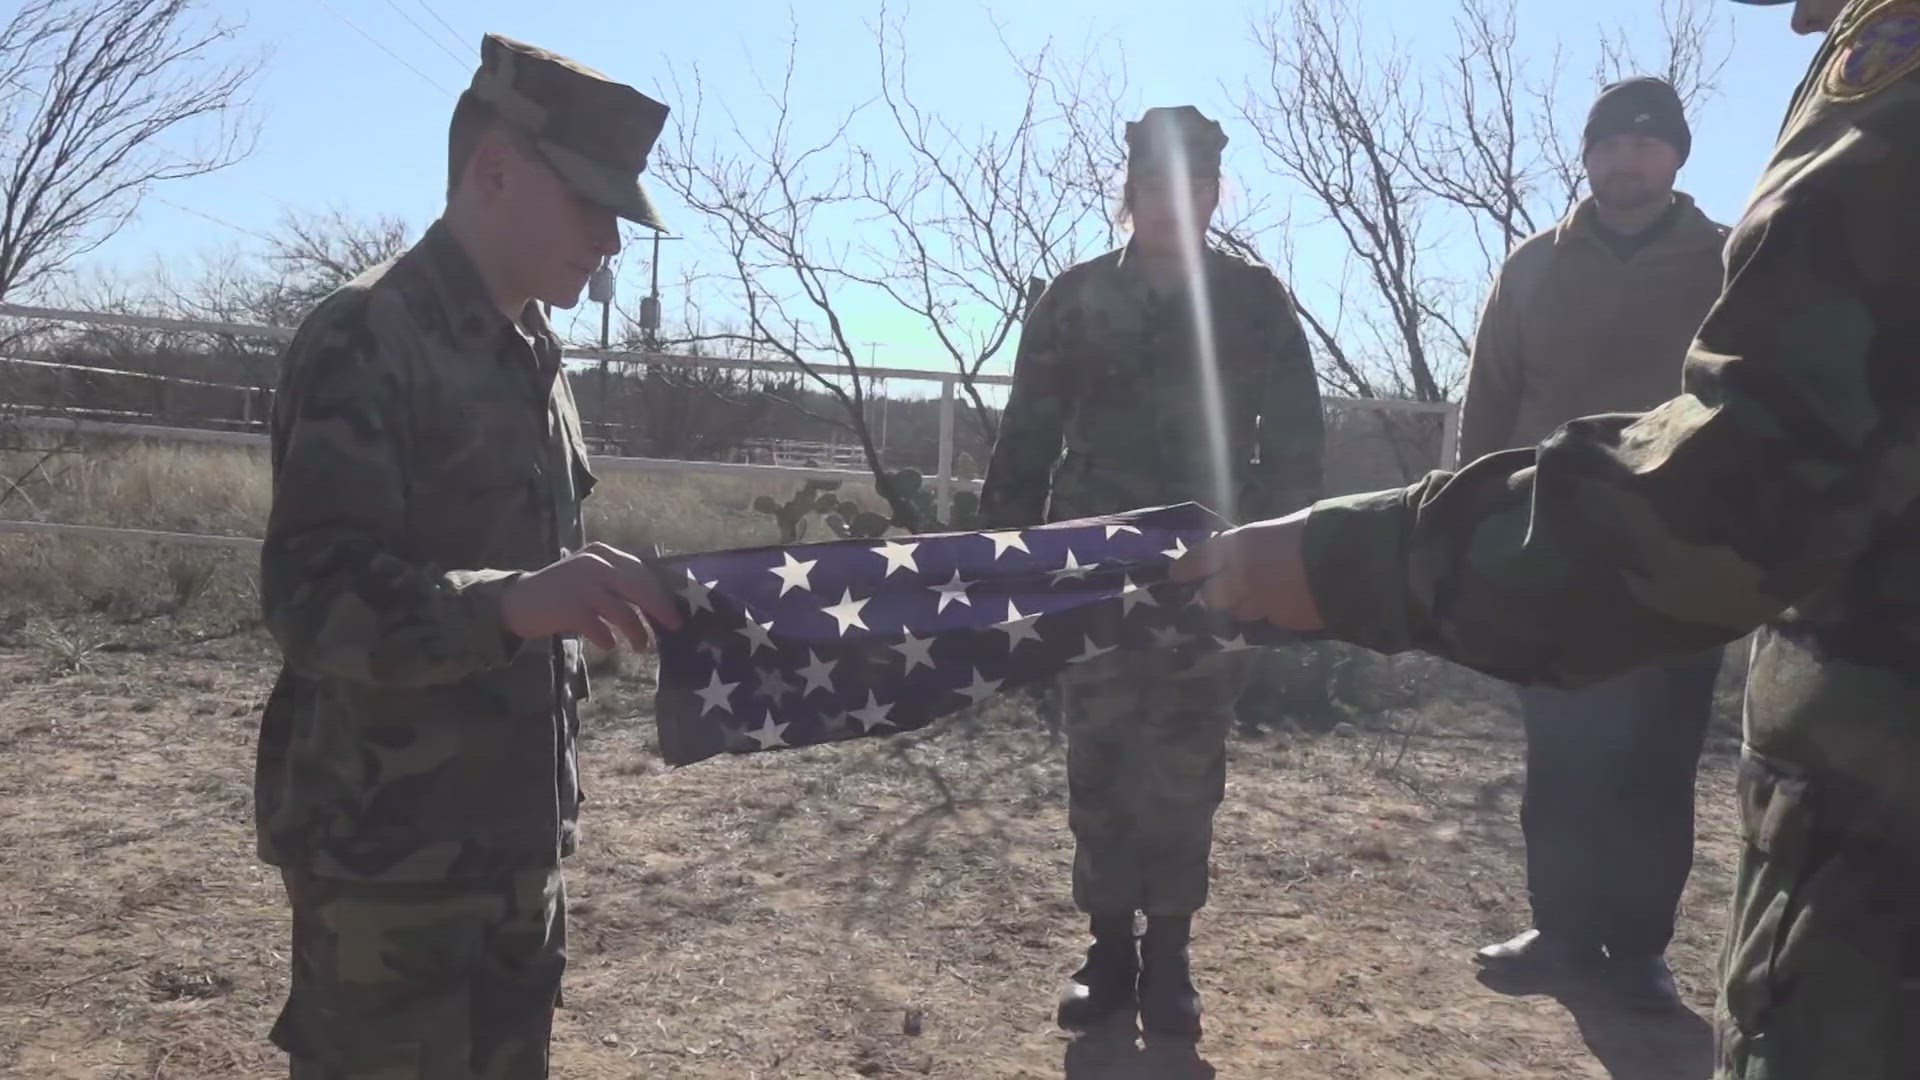 You don't just throw away an American flag when its time is up, instead you give it a proper send off by doing a flag retirement ceremony.